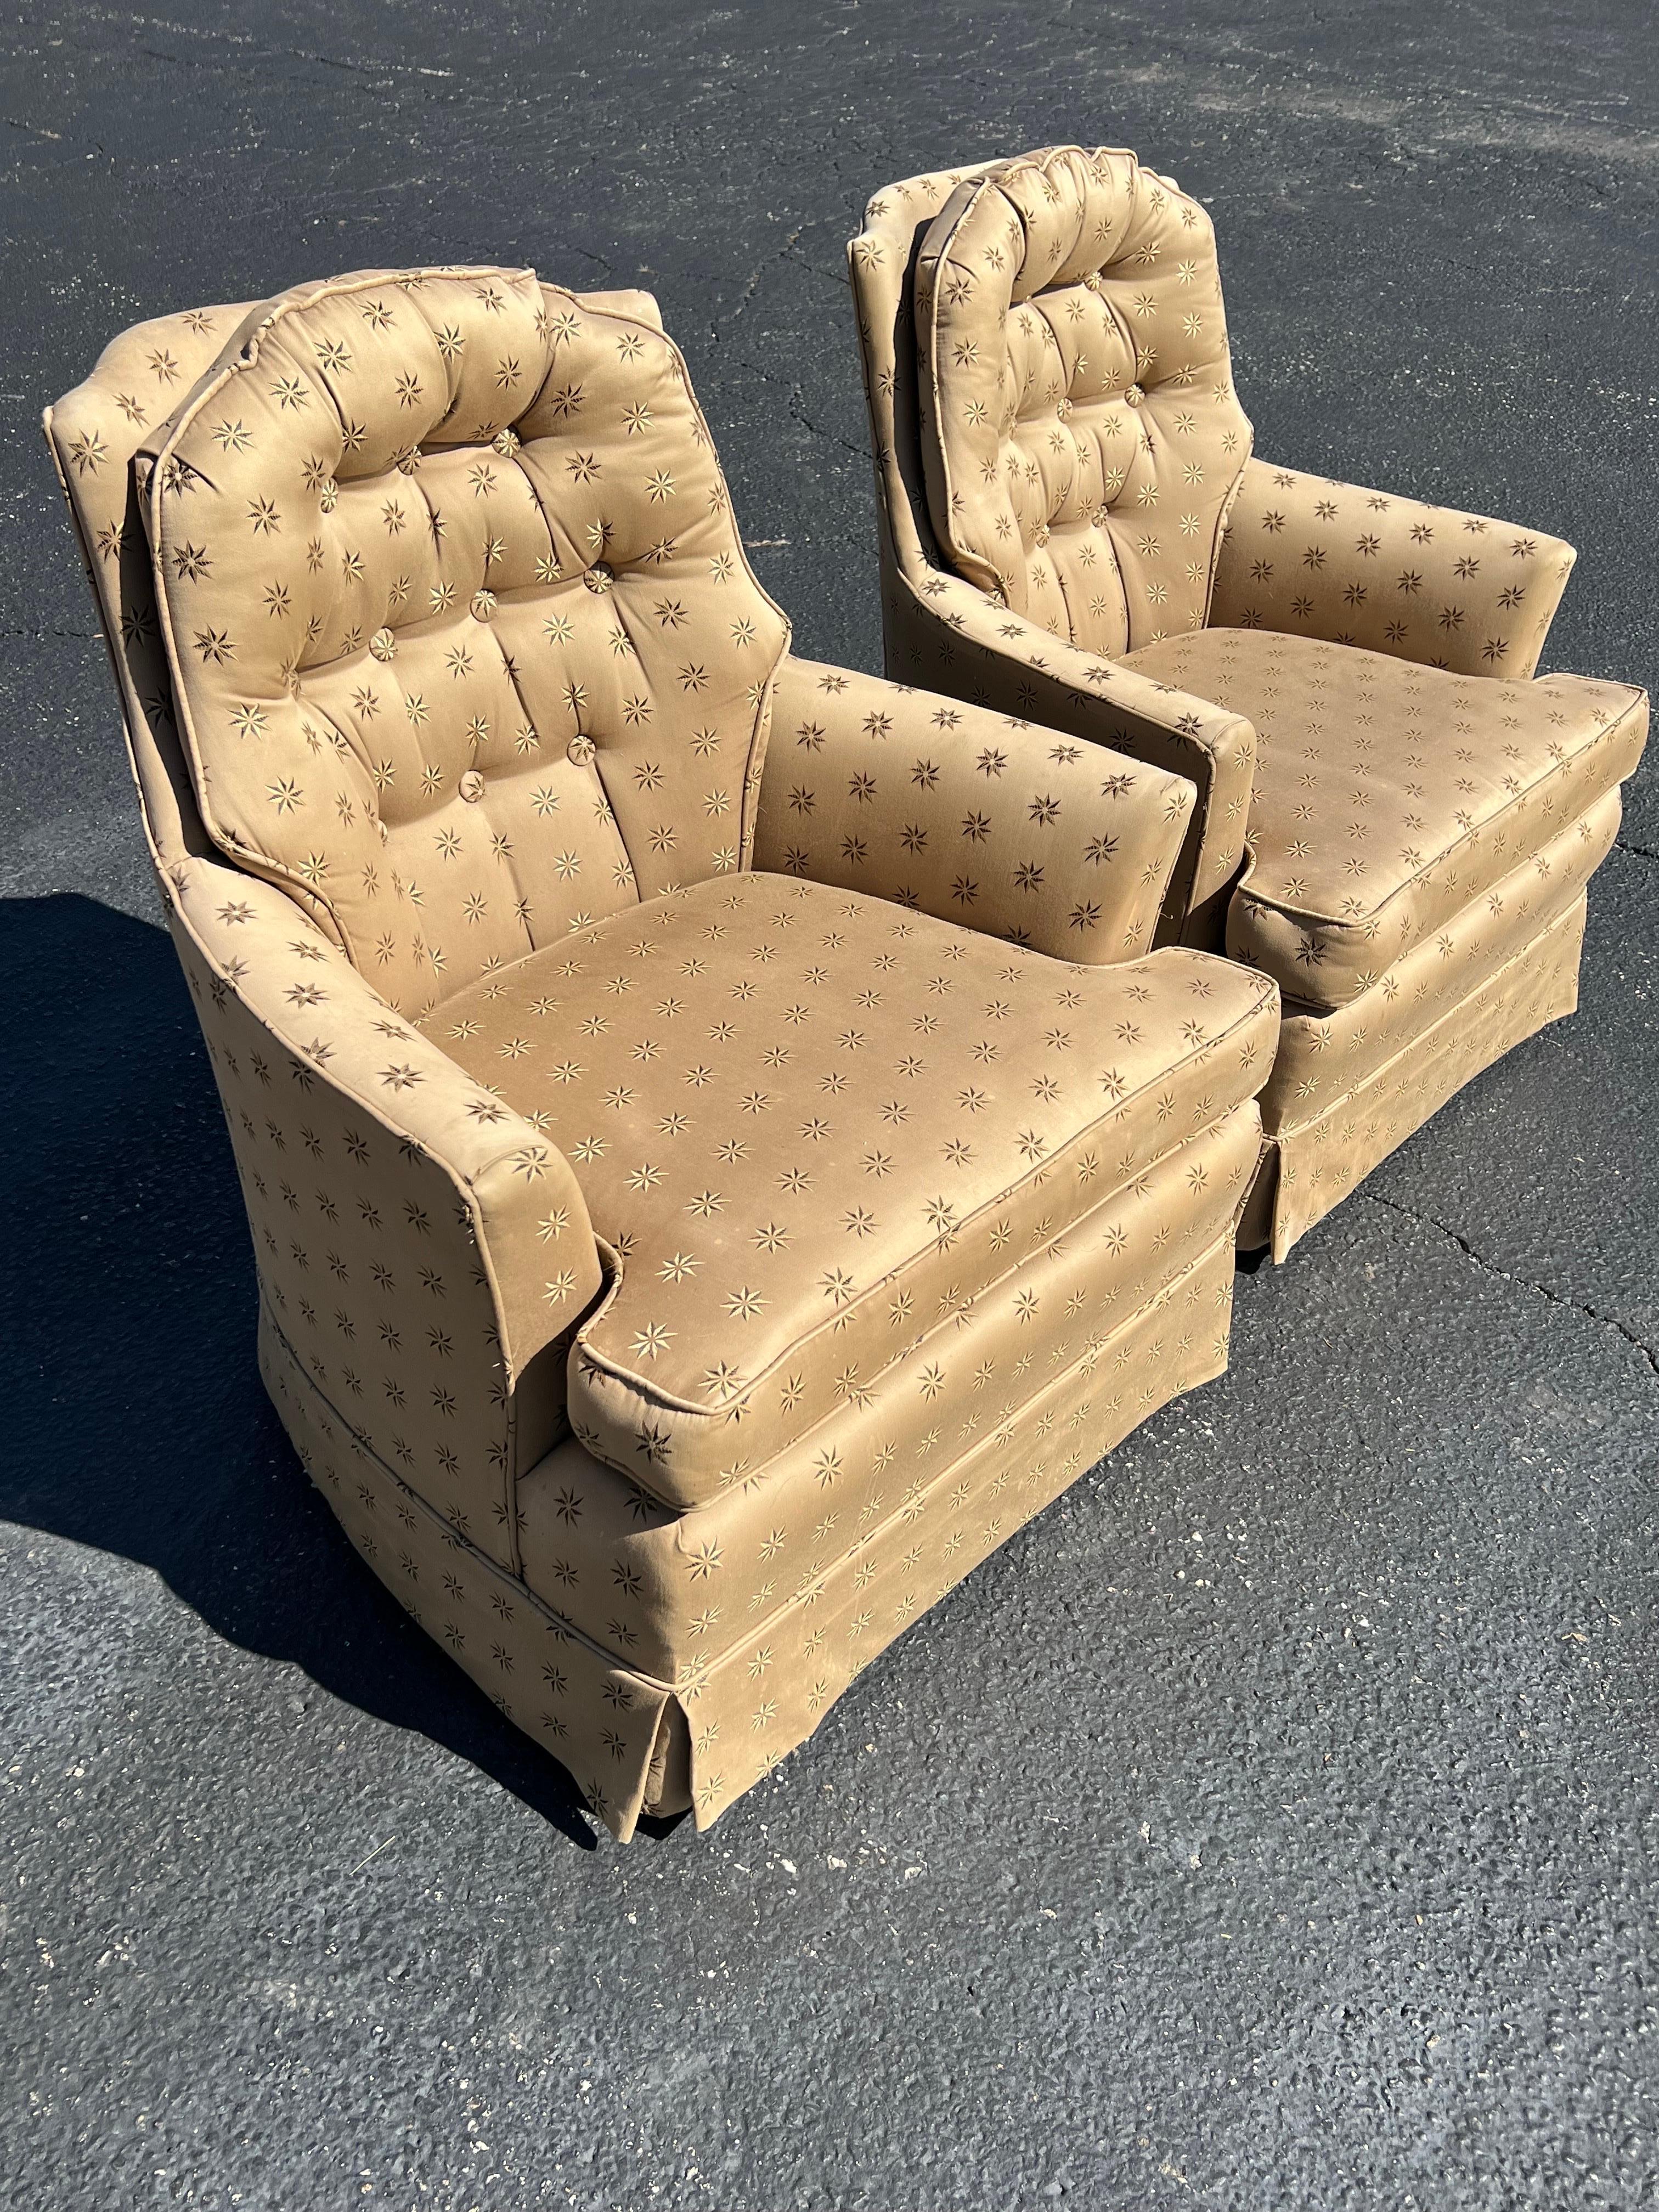 Pair of Upholstered Arm Chairs. These classic styled chairs are covered in a silk upholstery with embroidered stars. Super comfortable and attractive. Solid construction.Although the fabric is amazing it might be best to recover as there is some